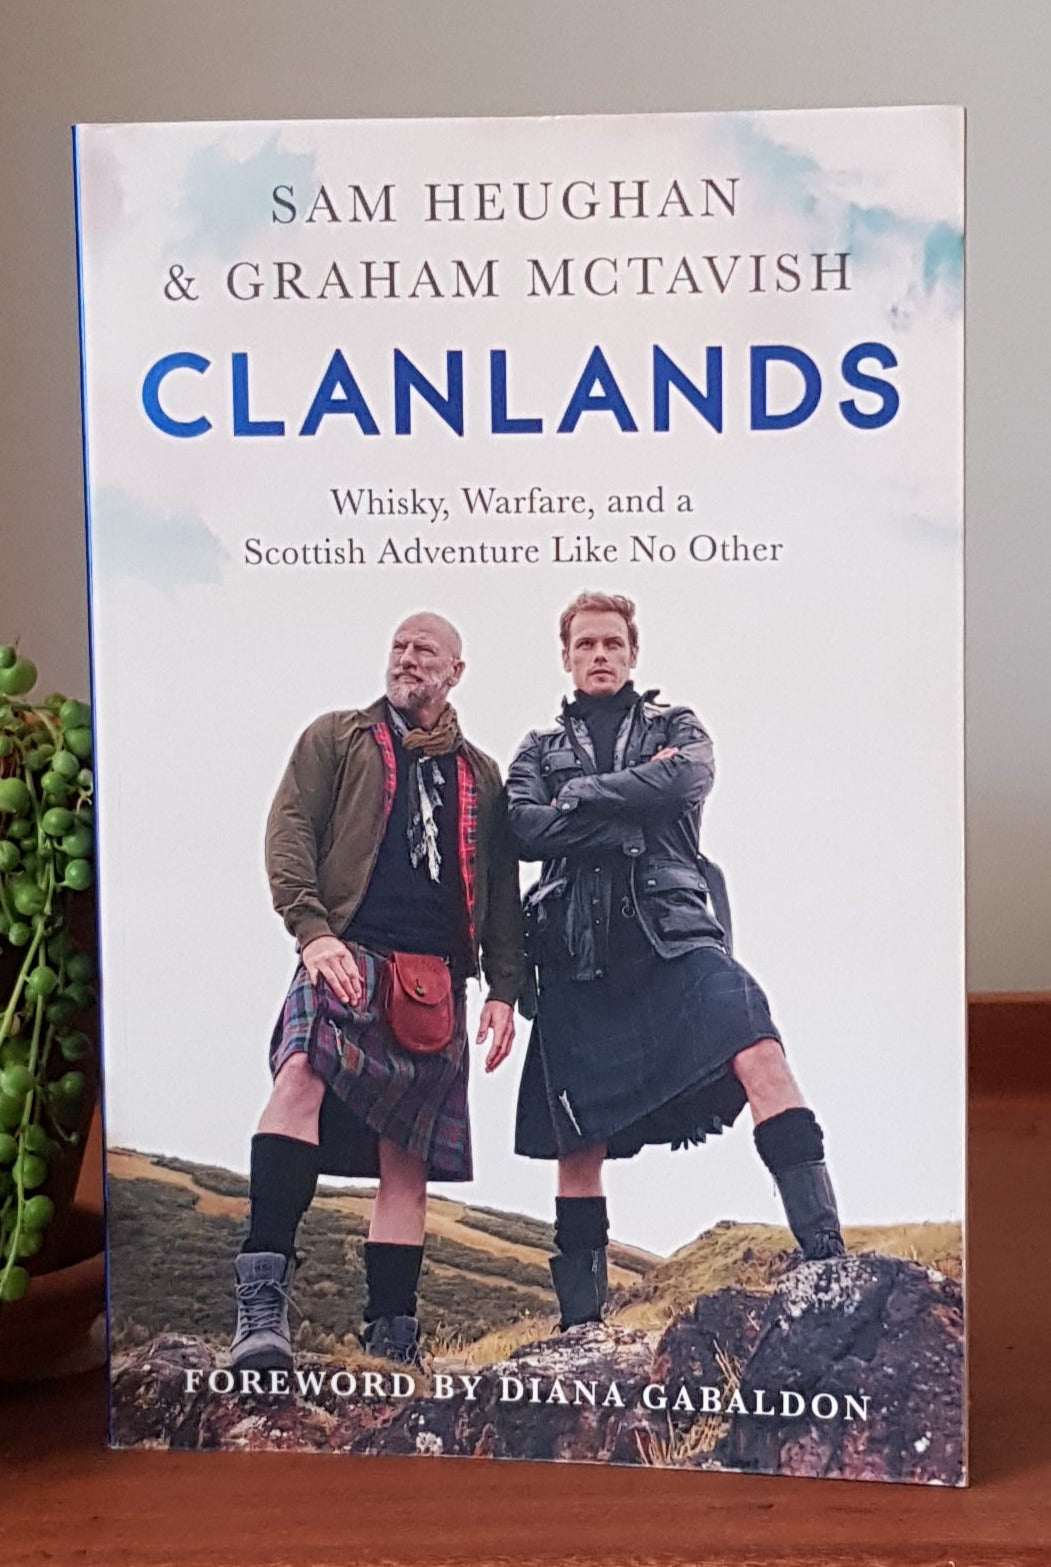 Clanlands: Whisky, Warfare, and a Scottish Adventure Like No Other by Sam Heughan, Graham McTavish,Charlotte Reather